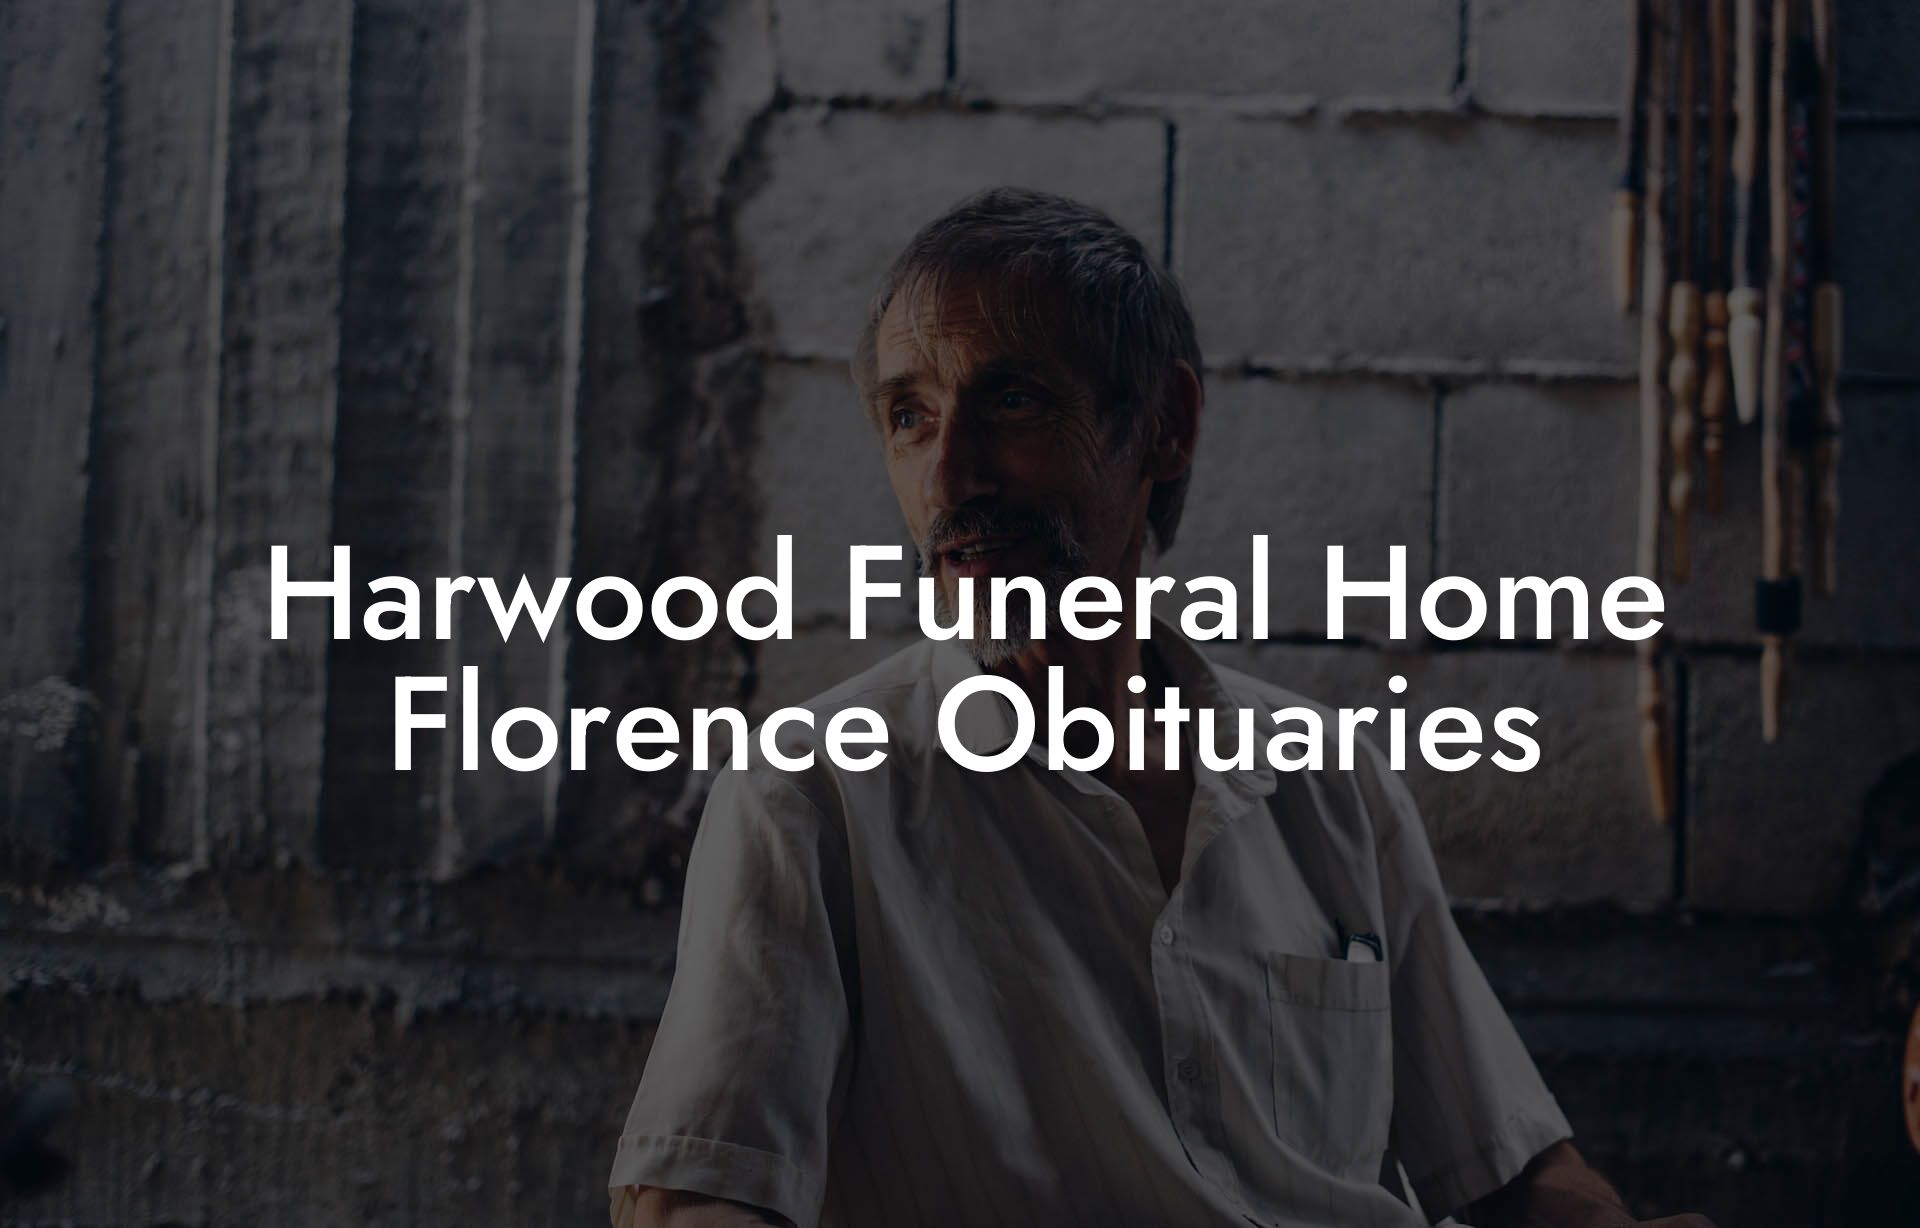 Harwood Funeral Home Florence Obituaries